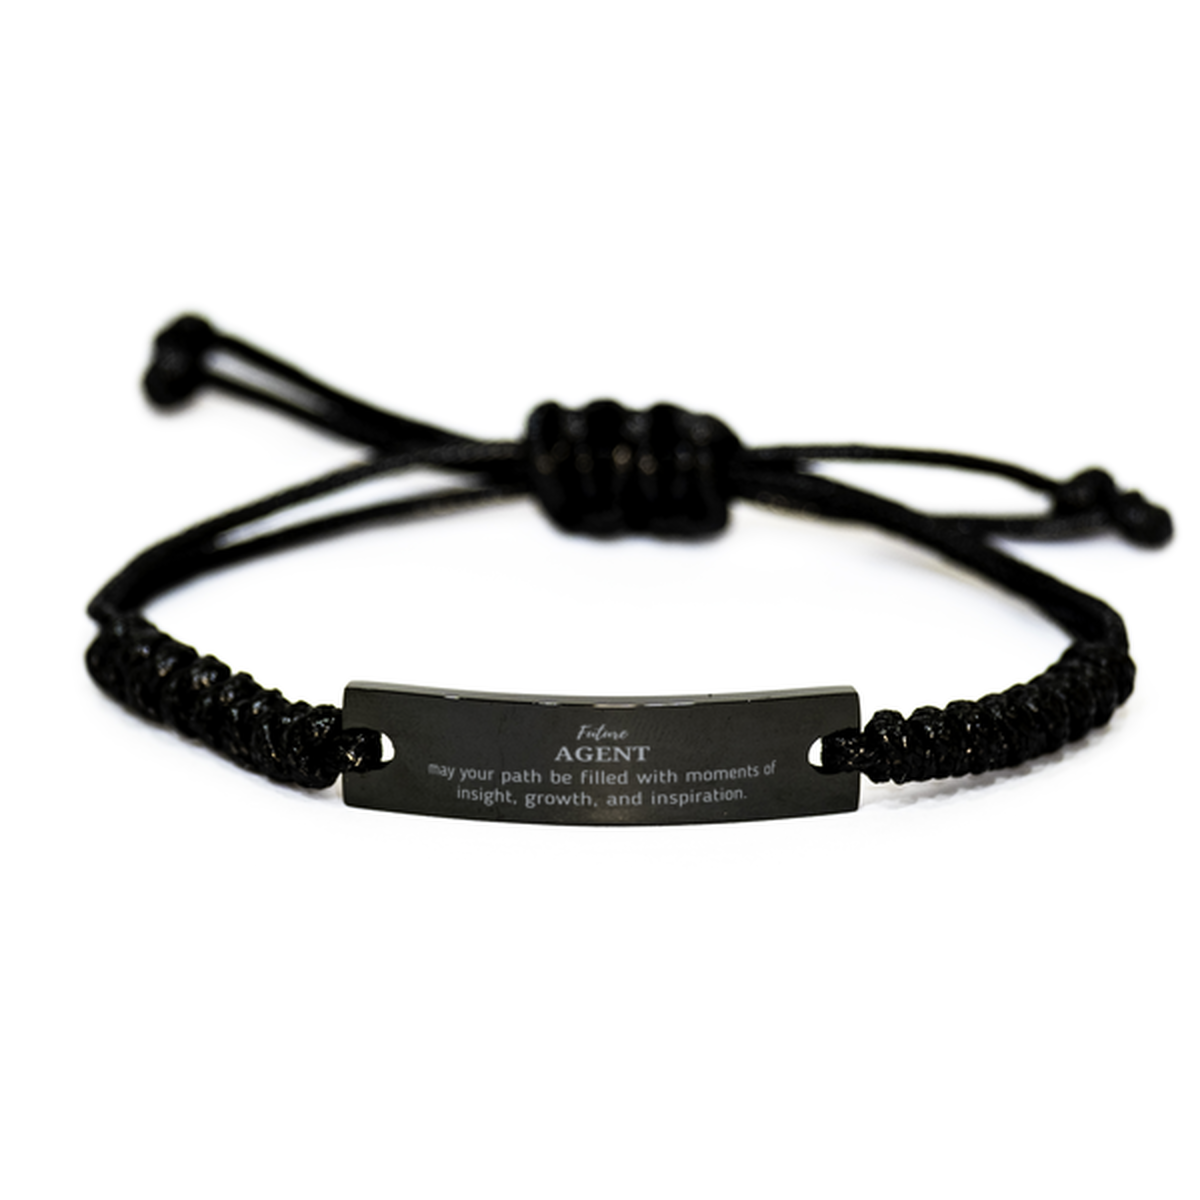 Future Agent Gifts, May your path be filled with moments of insight, Graduation Gifts for New Agent, Christmas Unique Black Rope Bracelet For Men, Women, Friends